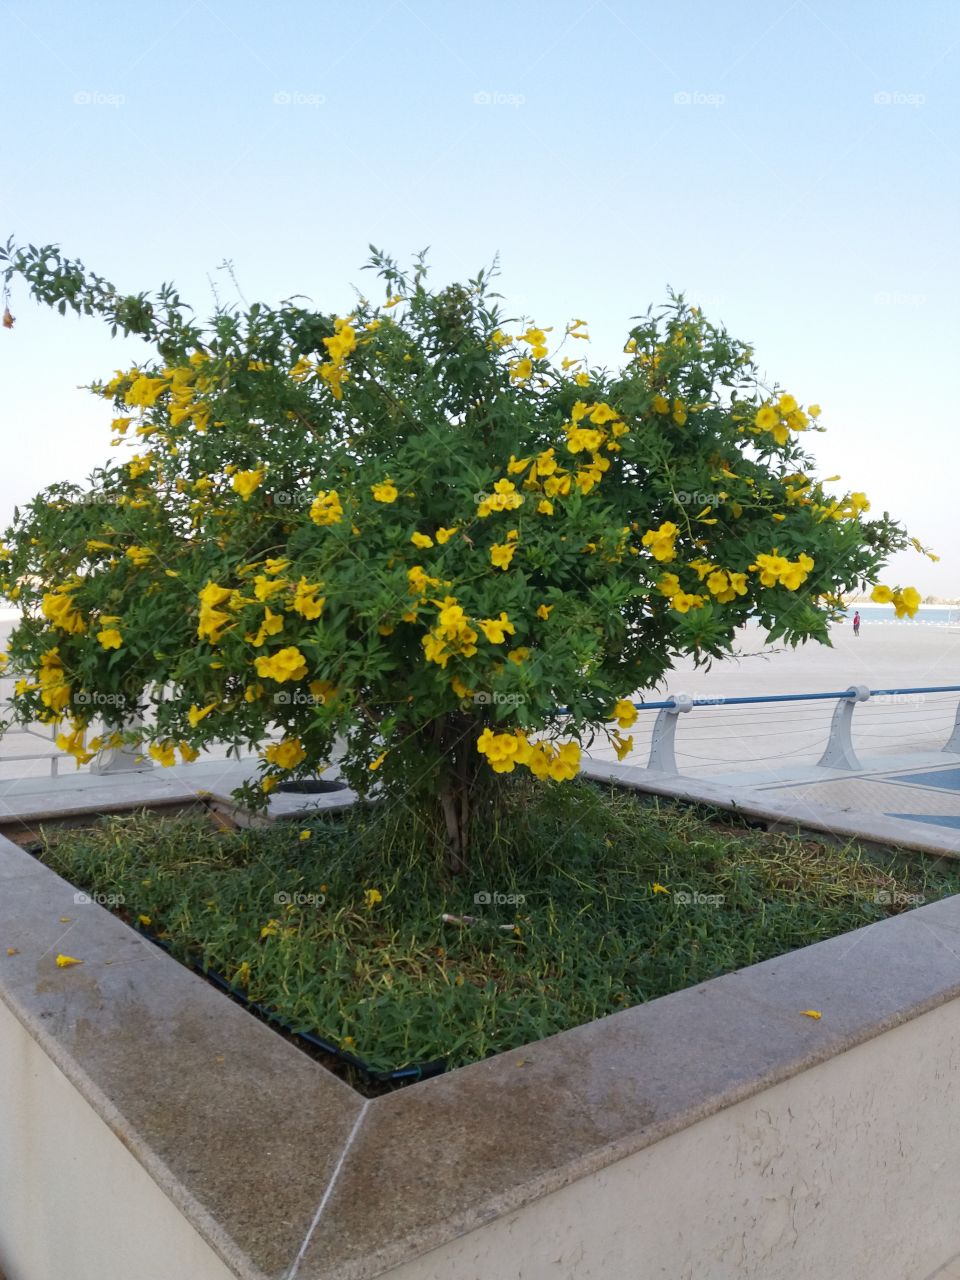 trees with yellow flowers